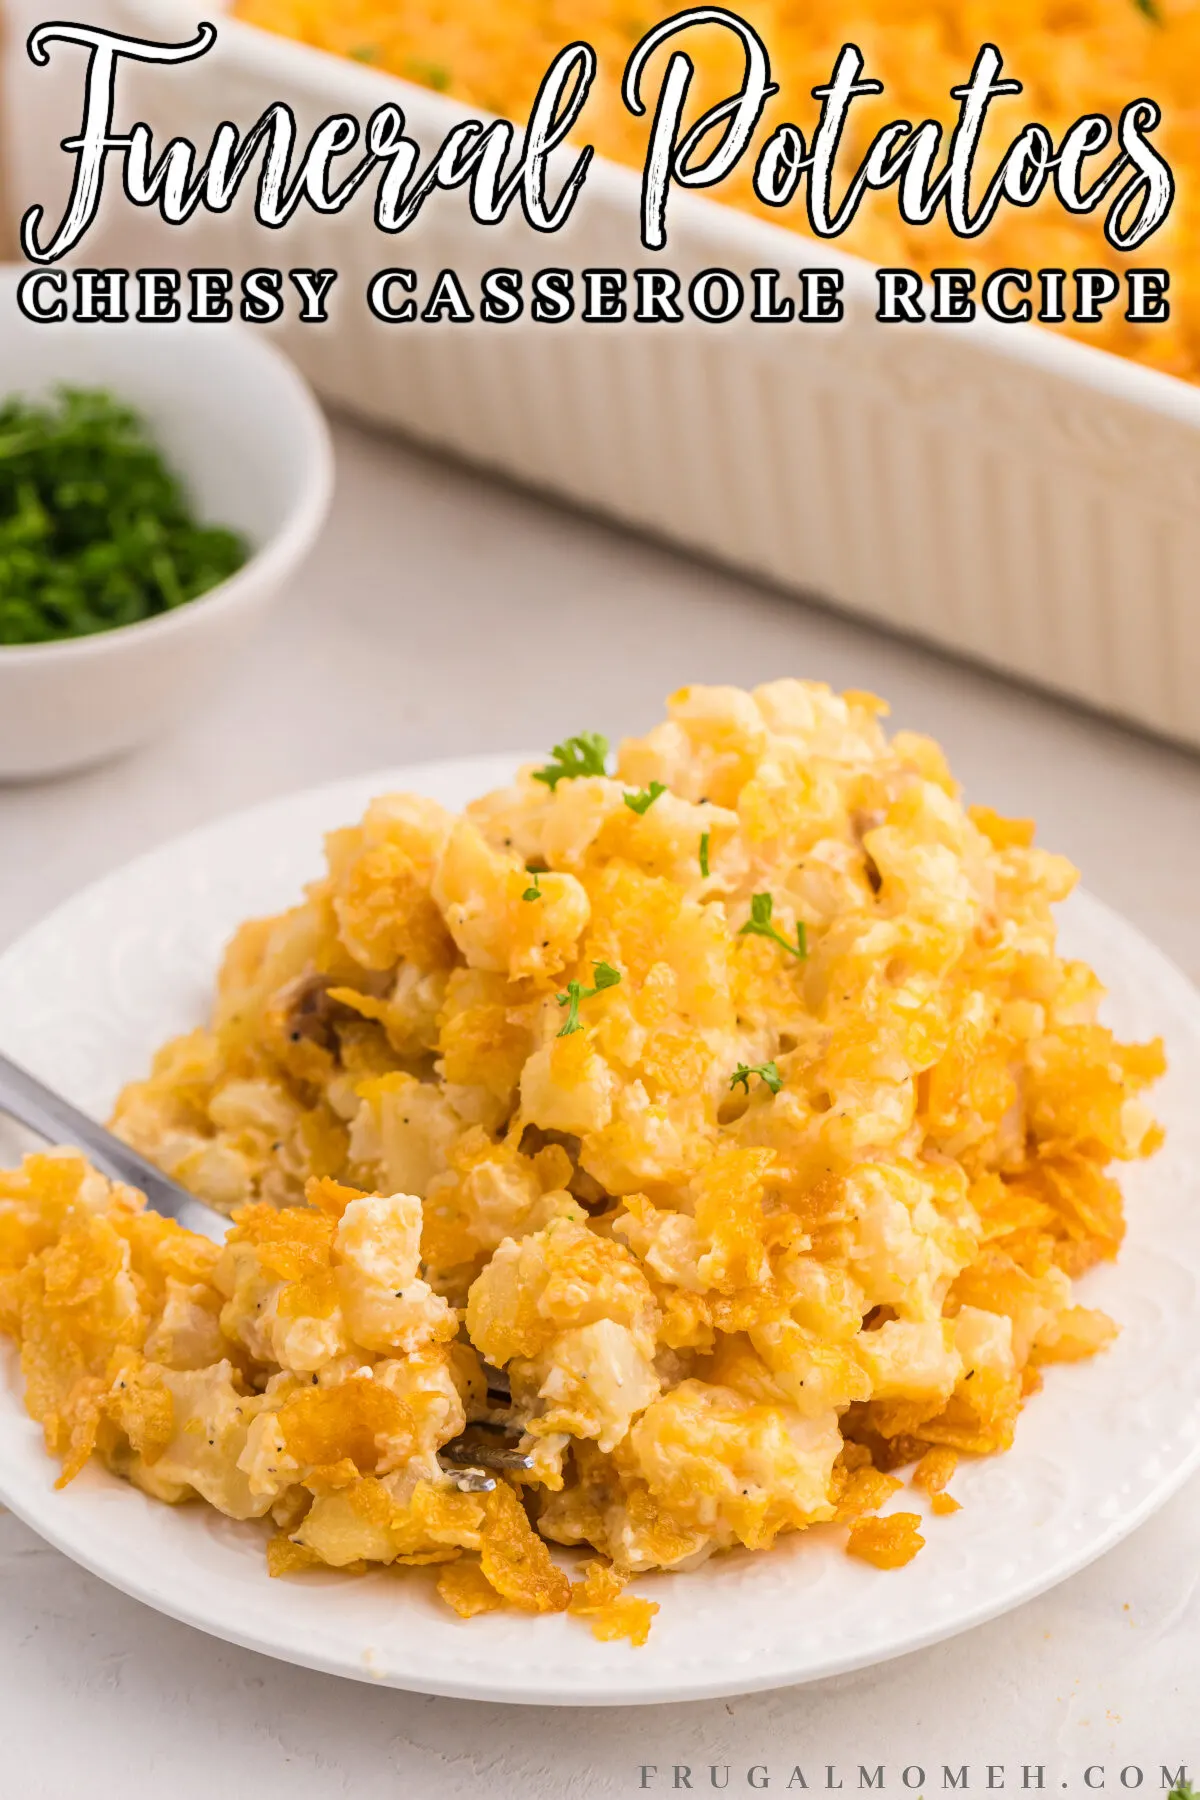 This is the best funeral potatoes recipe I've ever had, it's creamy and delicious - a great side dish for potlucks and family dinners.